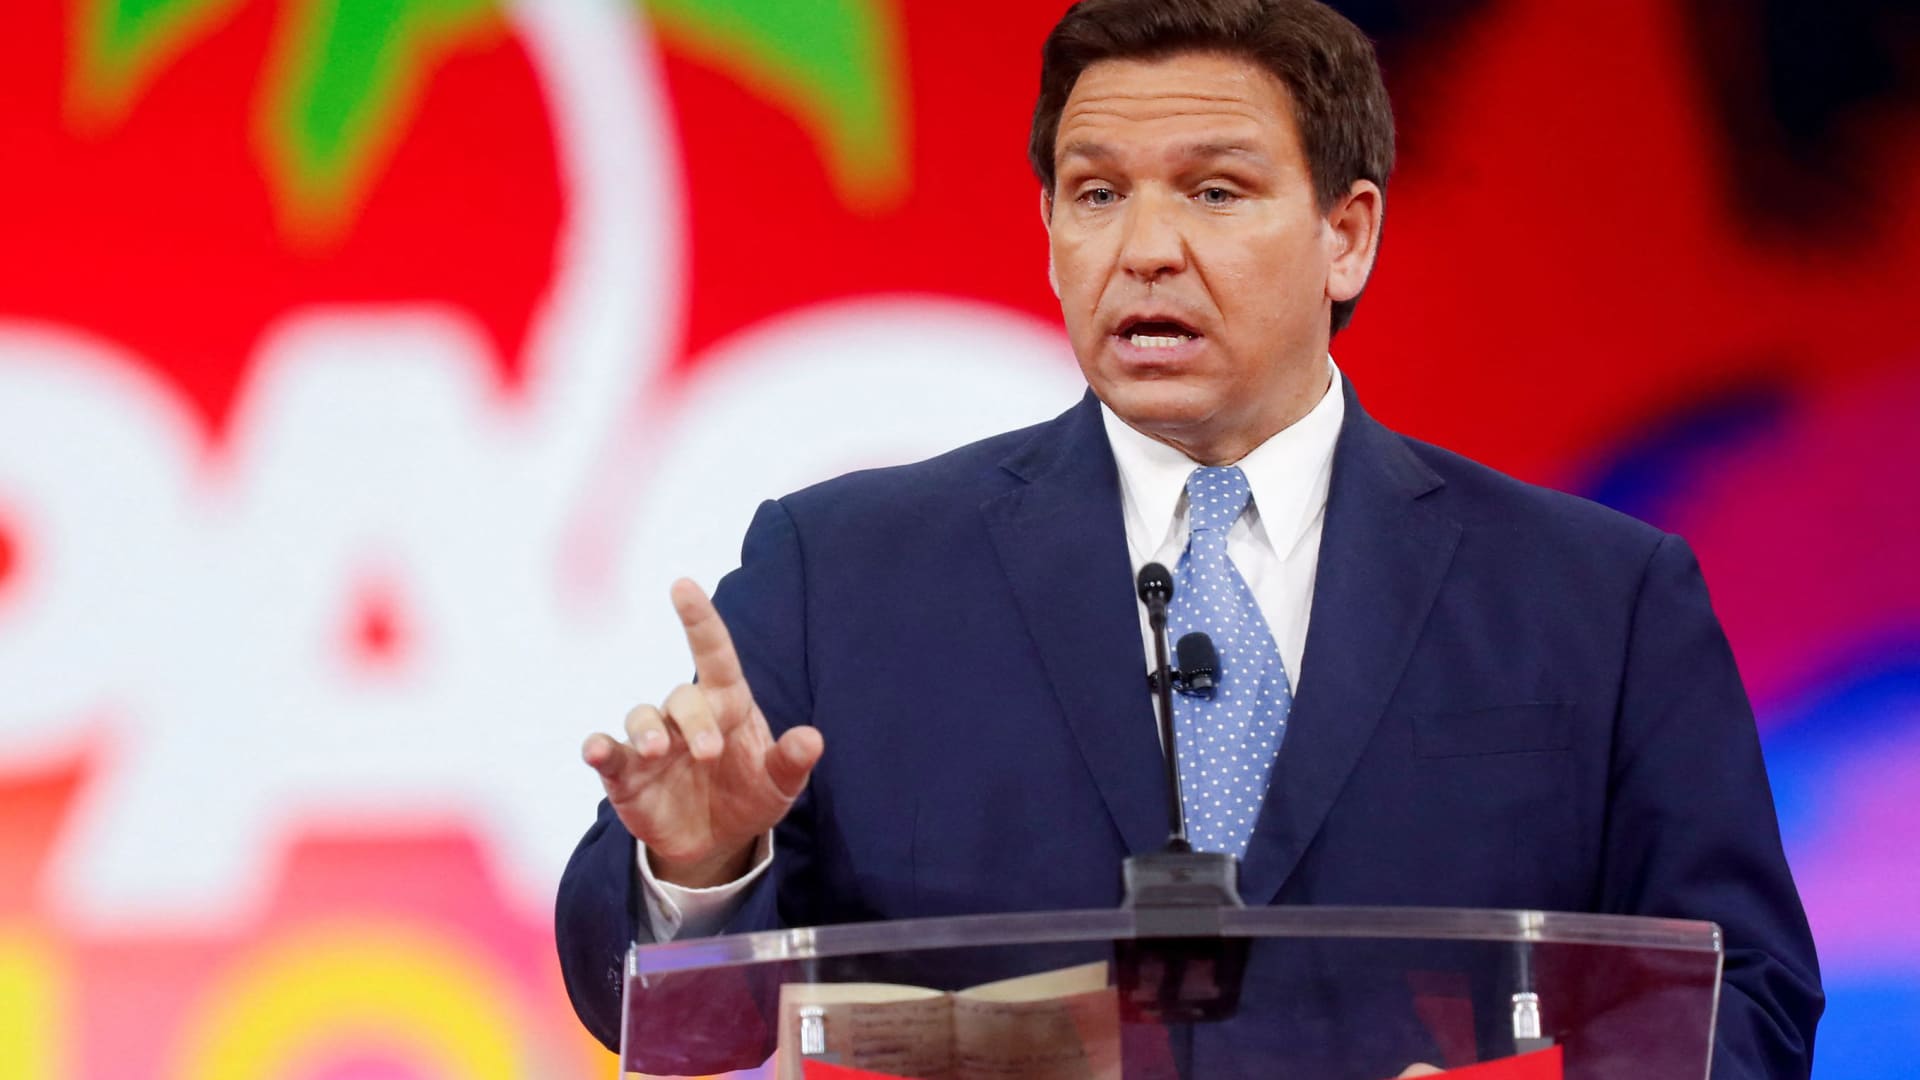 U.S. Florida Governor Ron DeSantis speaks at the Conservative Political Action Conference (CPAC) in Orlando, Florida, February 24, 2022.